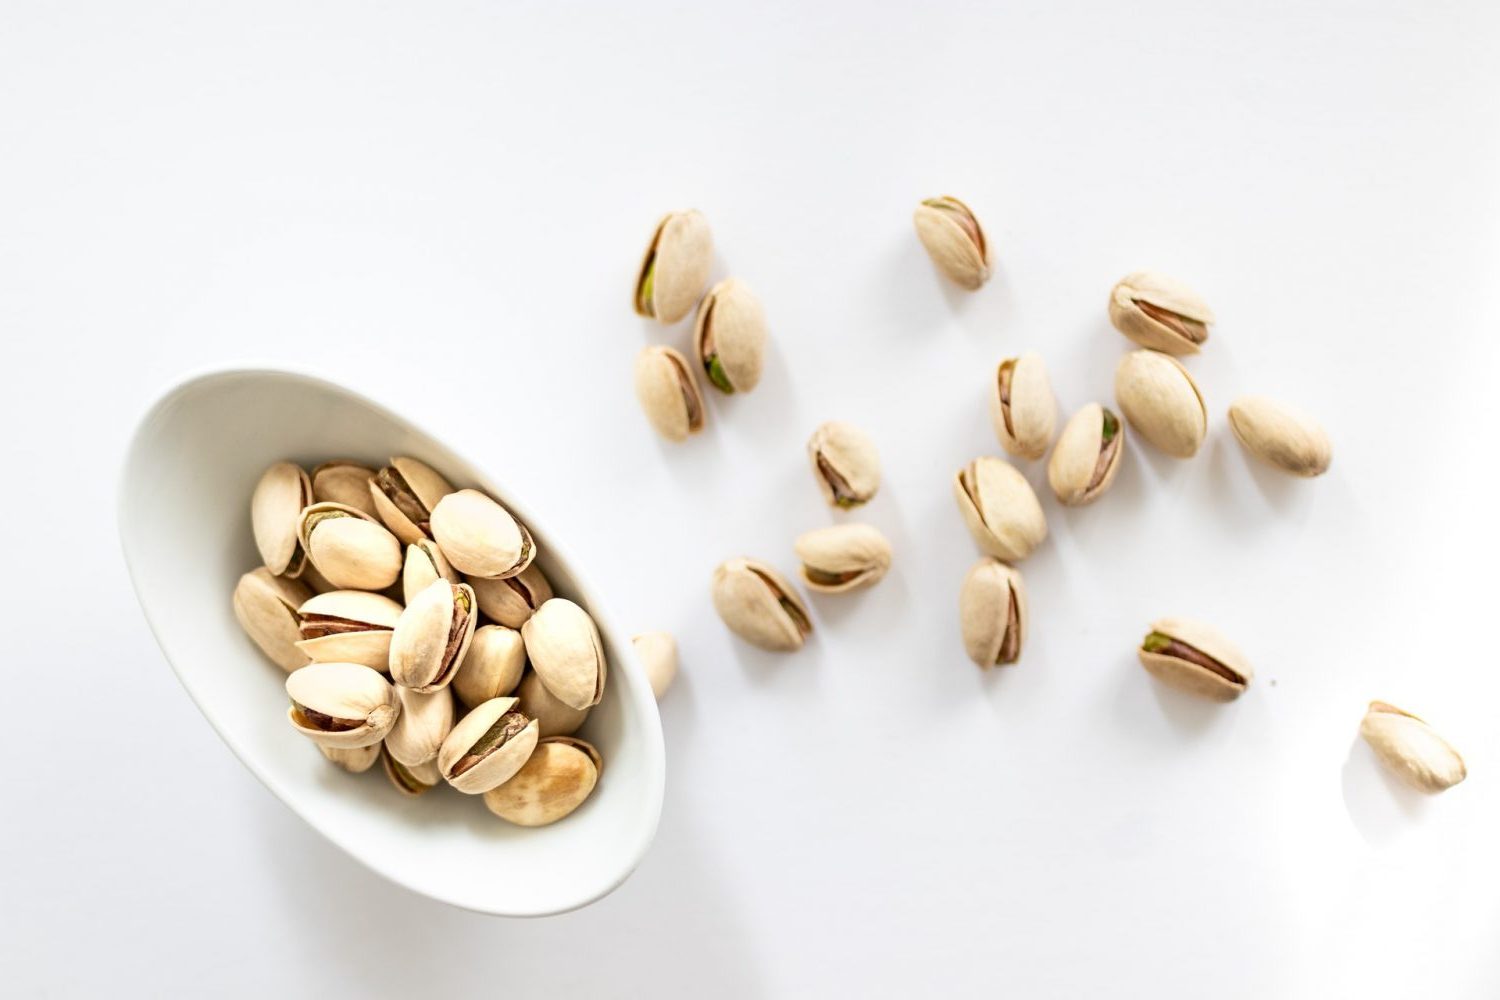 Pistachios are a great source of fiber in a low carb diet.